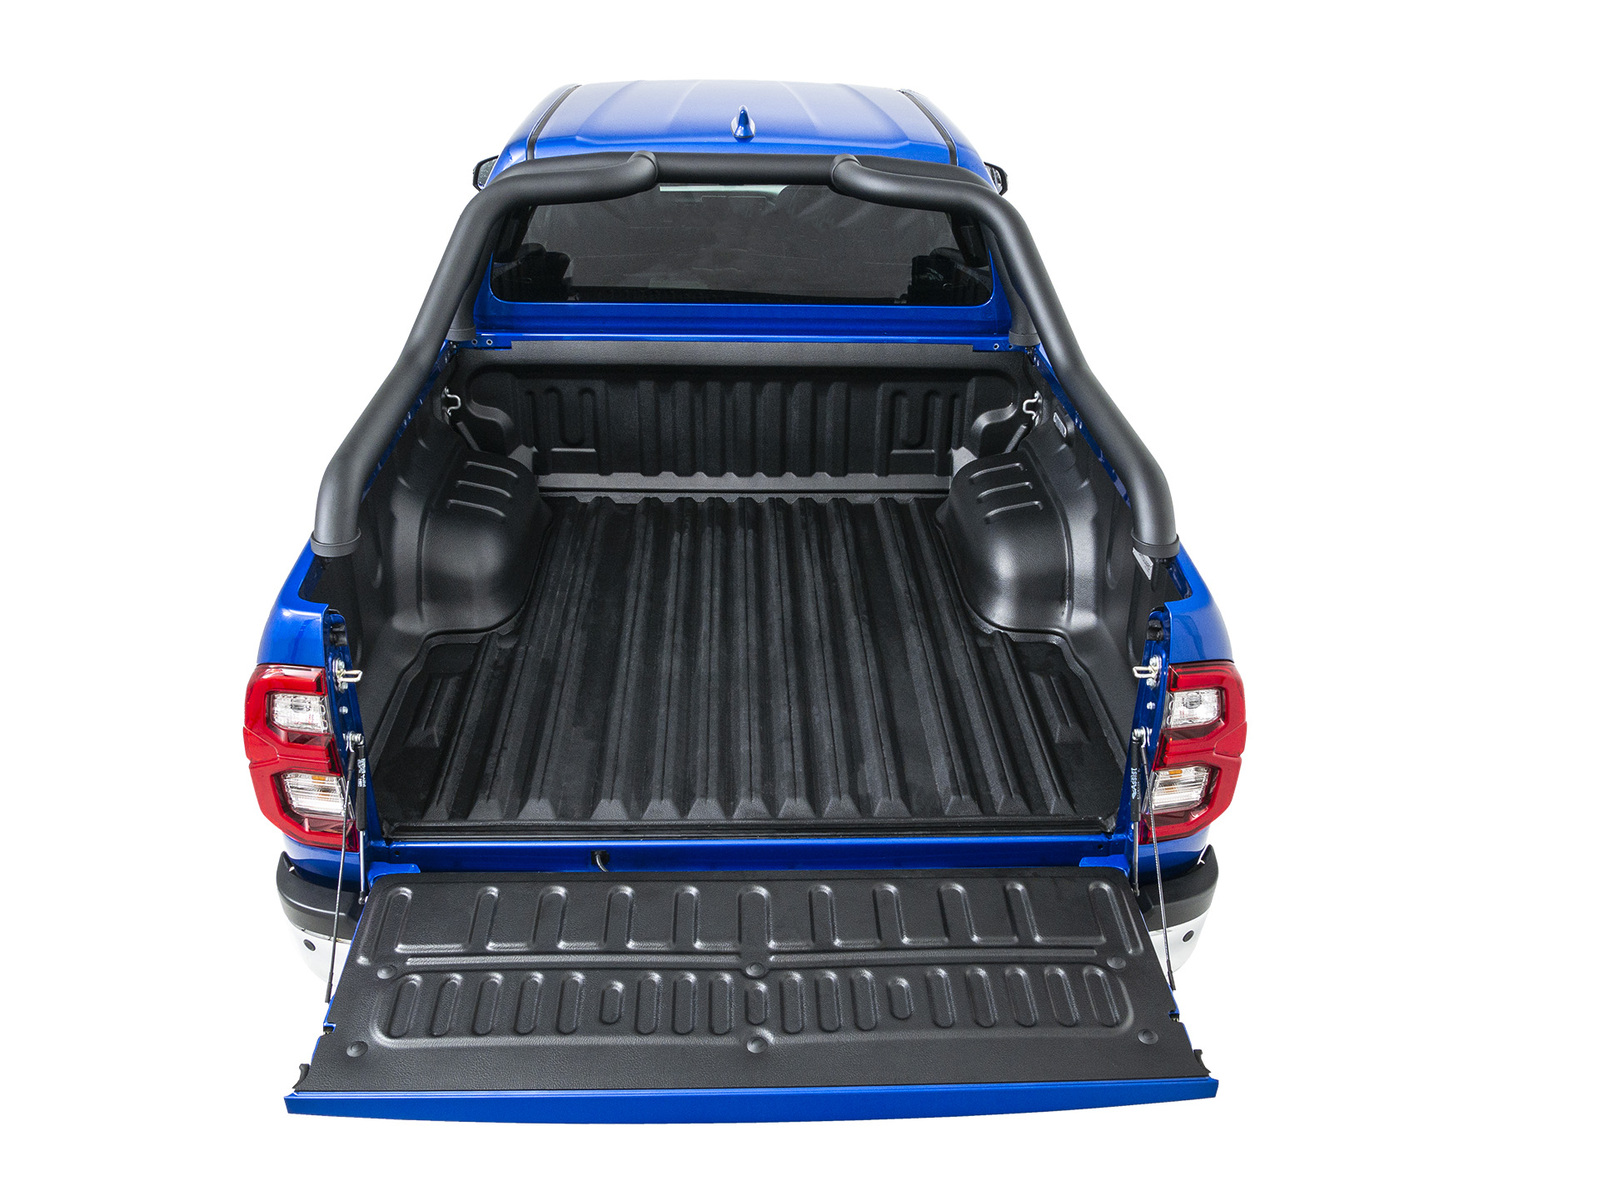 HSP Armour Bar (Black) To Suit Dual Cab Toyota Hilux (2015-On)